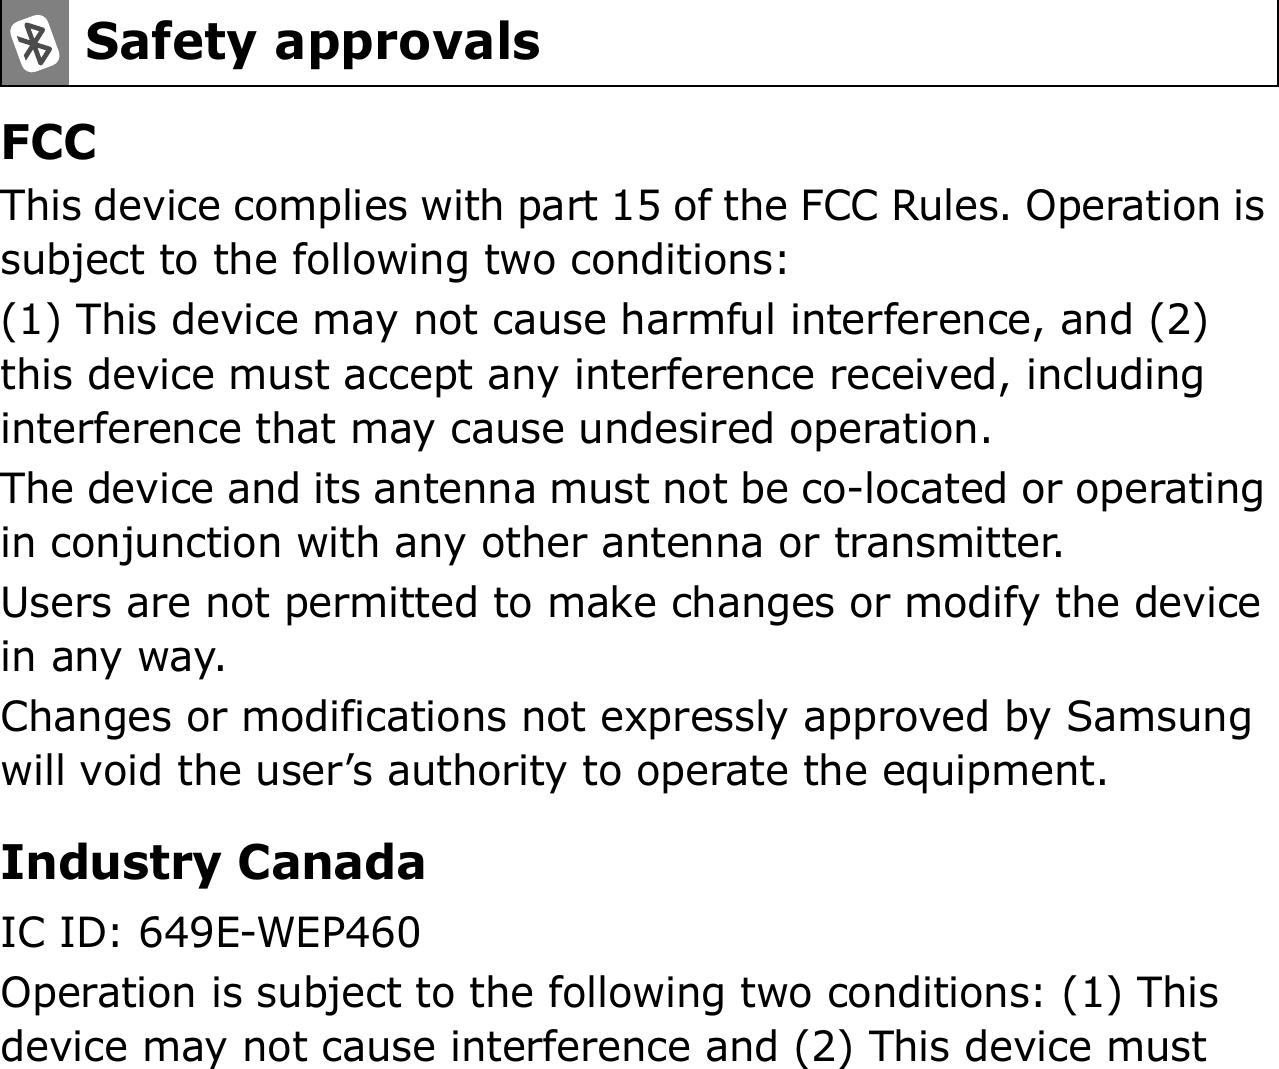 FCCThis device complies with part 15 of the FCC Rules. Operation is subject to the following two conditions:(1) This device may not cause harmful interference, and (2) this device must accept any interference received, including interference that may cause undesired operation.The device and its antenna must not be co-located or operating in conjunction with any other antenna or transmitter.Users are not permitted to make changes or modify the device in any way. Changes or modifications not expressly approved by Samsung will void the user’s authority to operate the equipment.Industry CanadaIC ID: 649E-WEP460Operation is subject to the following two conditions: (1) This device may not cause interference and (2) This device must Safety approvals